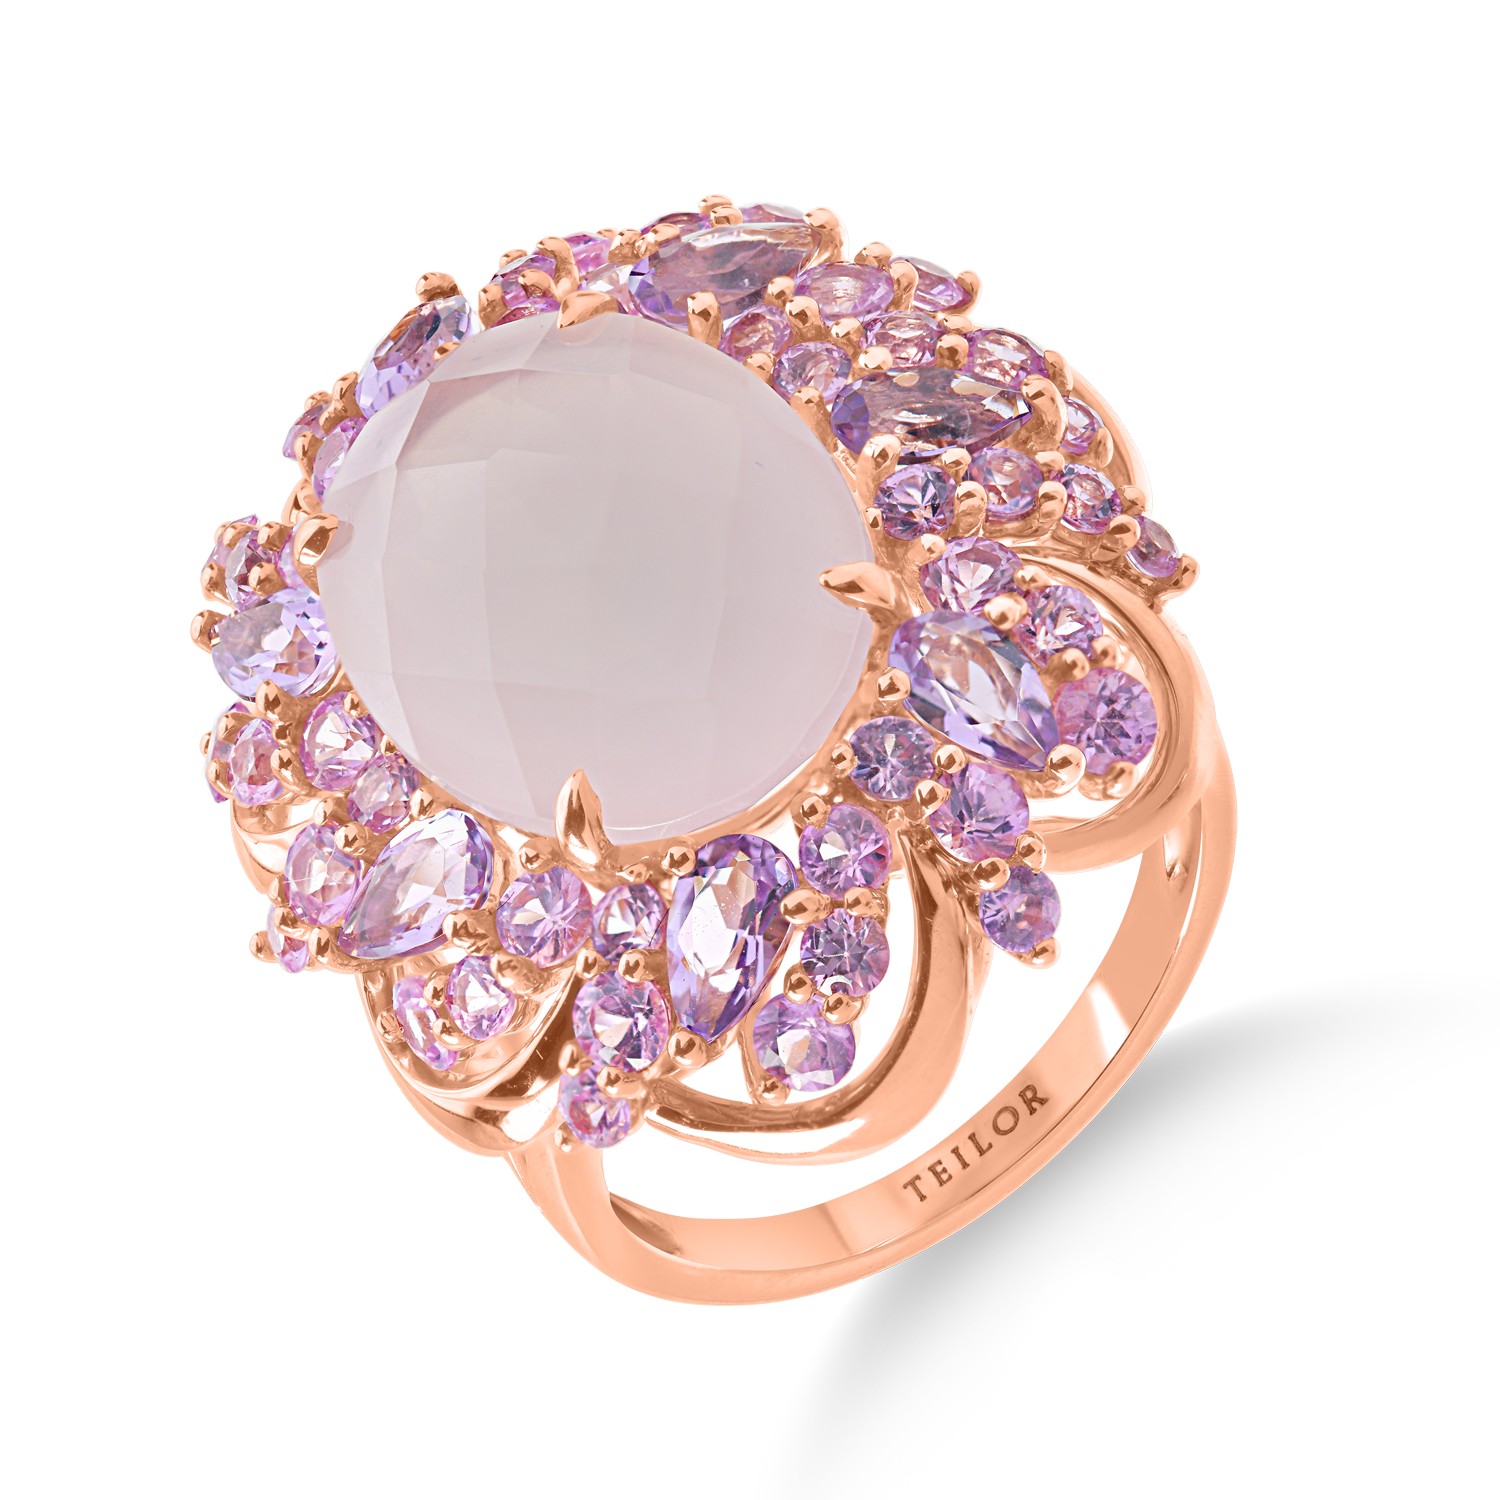 Rose gold ring with 13.2ct semi-precious stones